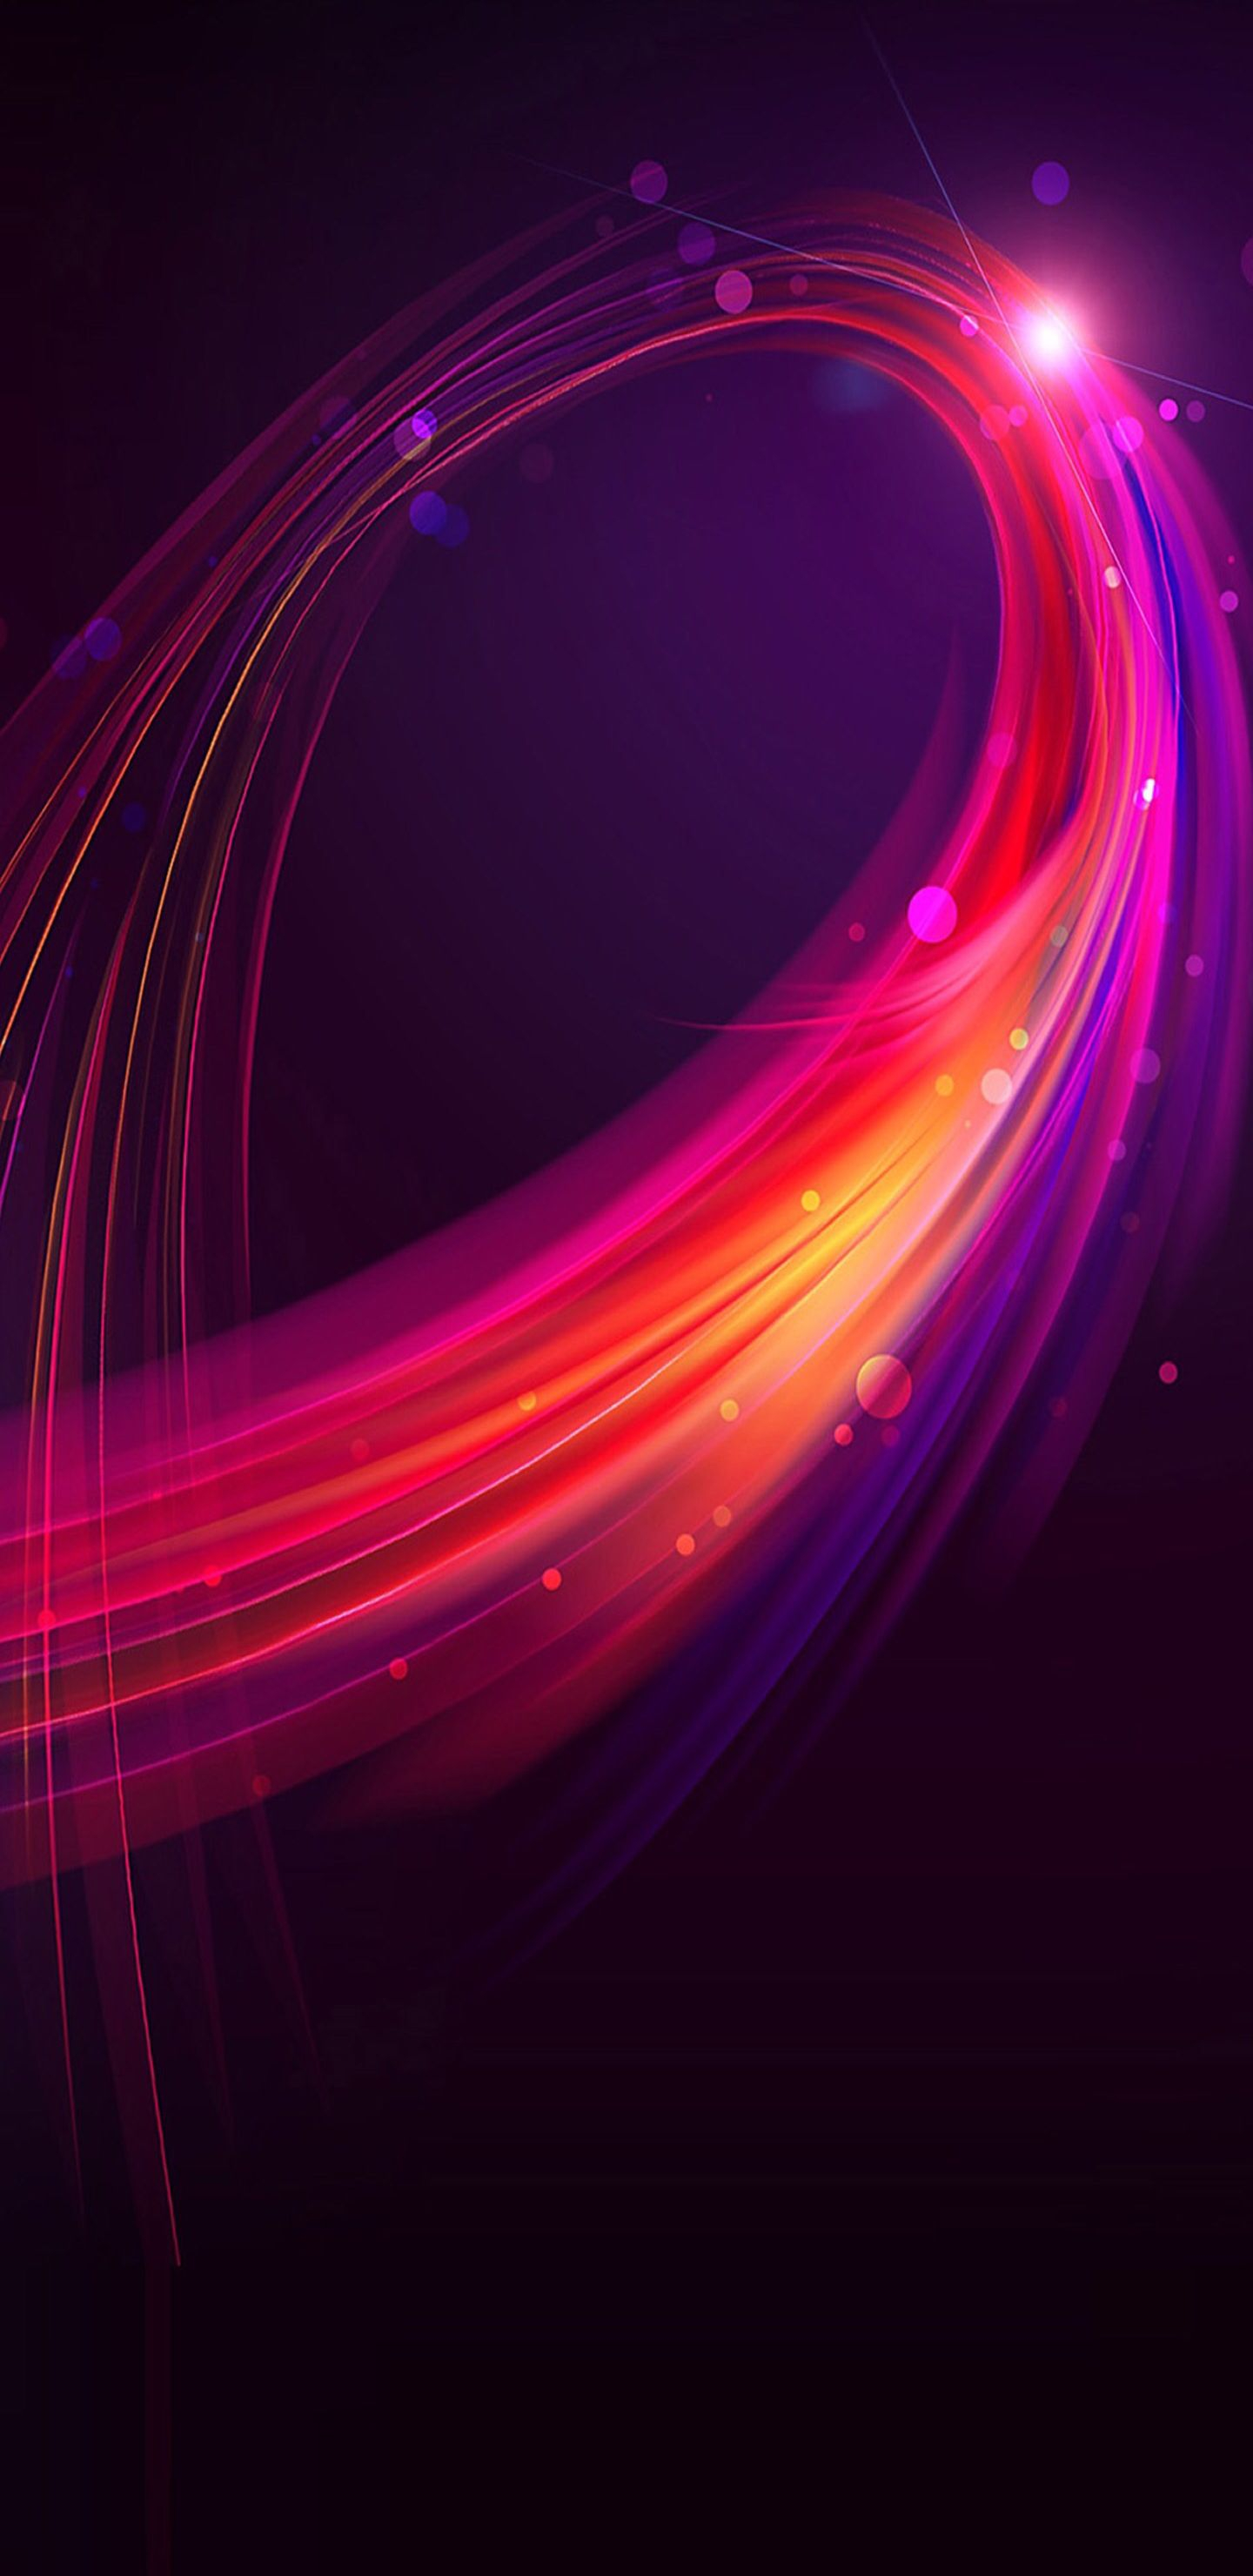 1440x2960 Blue, red, purple, minimal, abstract, wallpaper, galaxy, clean, beauty, colour, minimal, s8, Samsung | S8 wallpaper, Galaxy s8 wallpaper, Pretty backgrounds